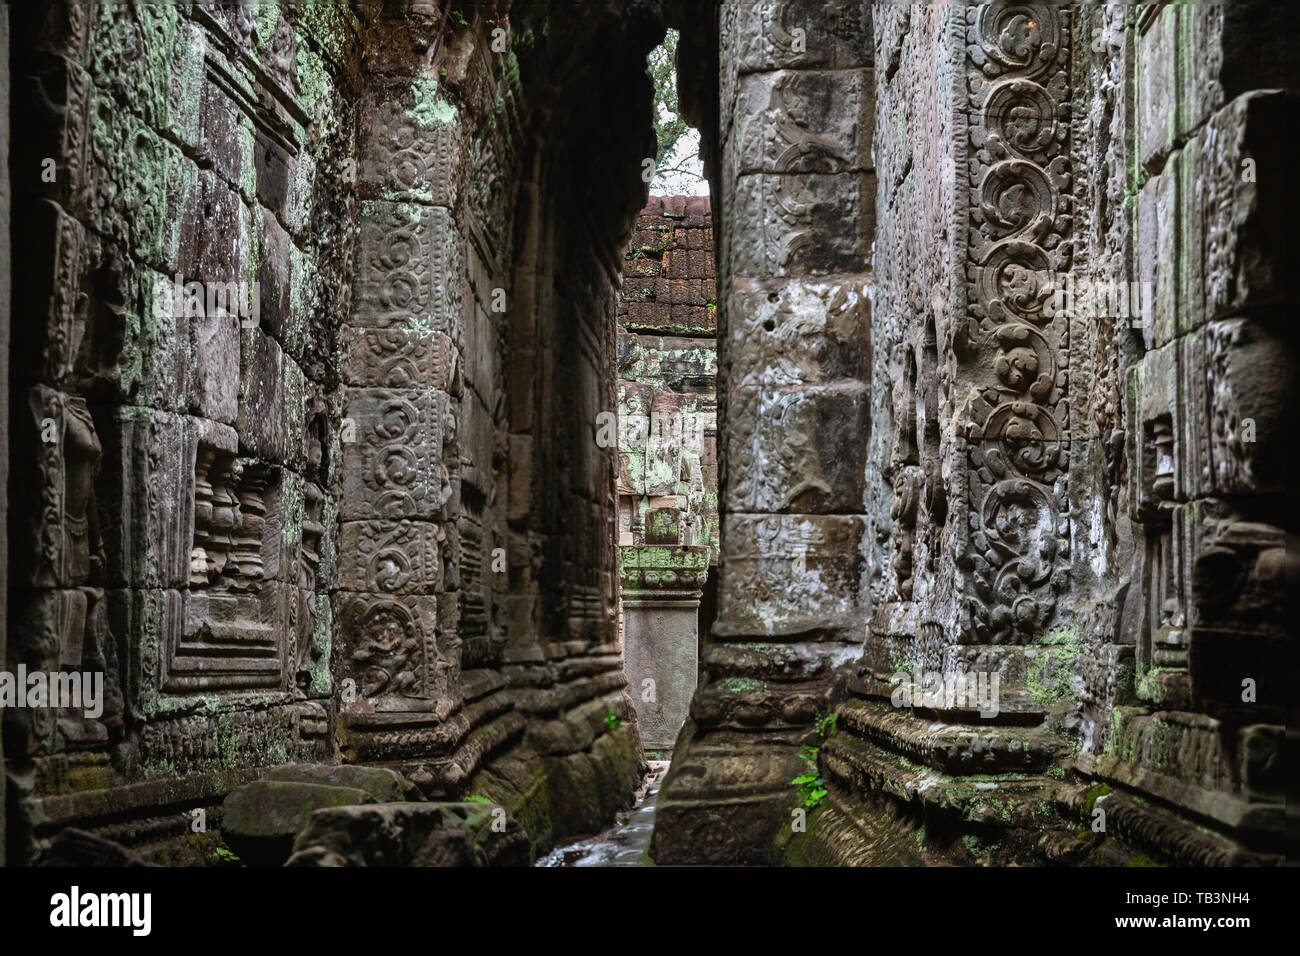 Preah Khan Temple, Angkor, UNESCO World Heritage Site, Siem Reap Province, Cambodia, Indochina, Southeast Asia, Asia Stock Photo